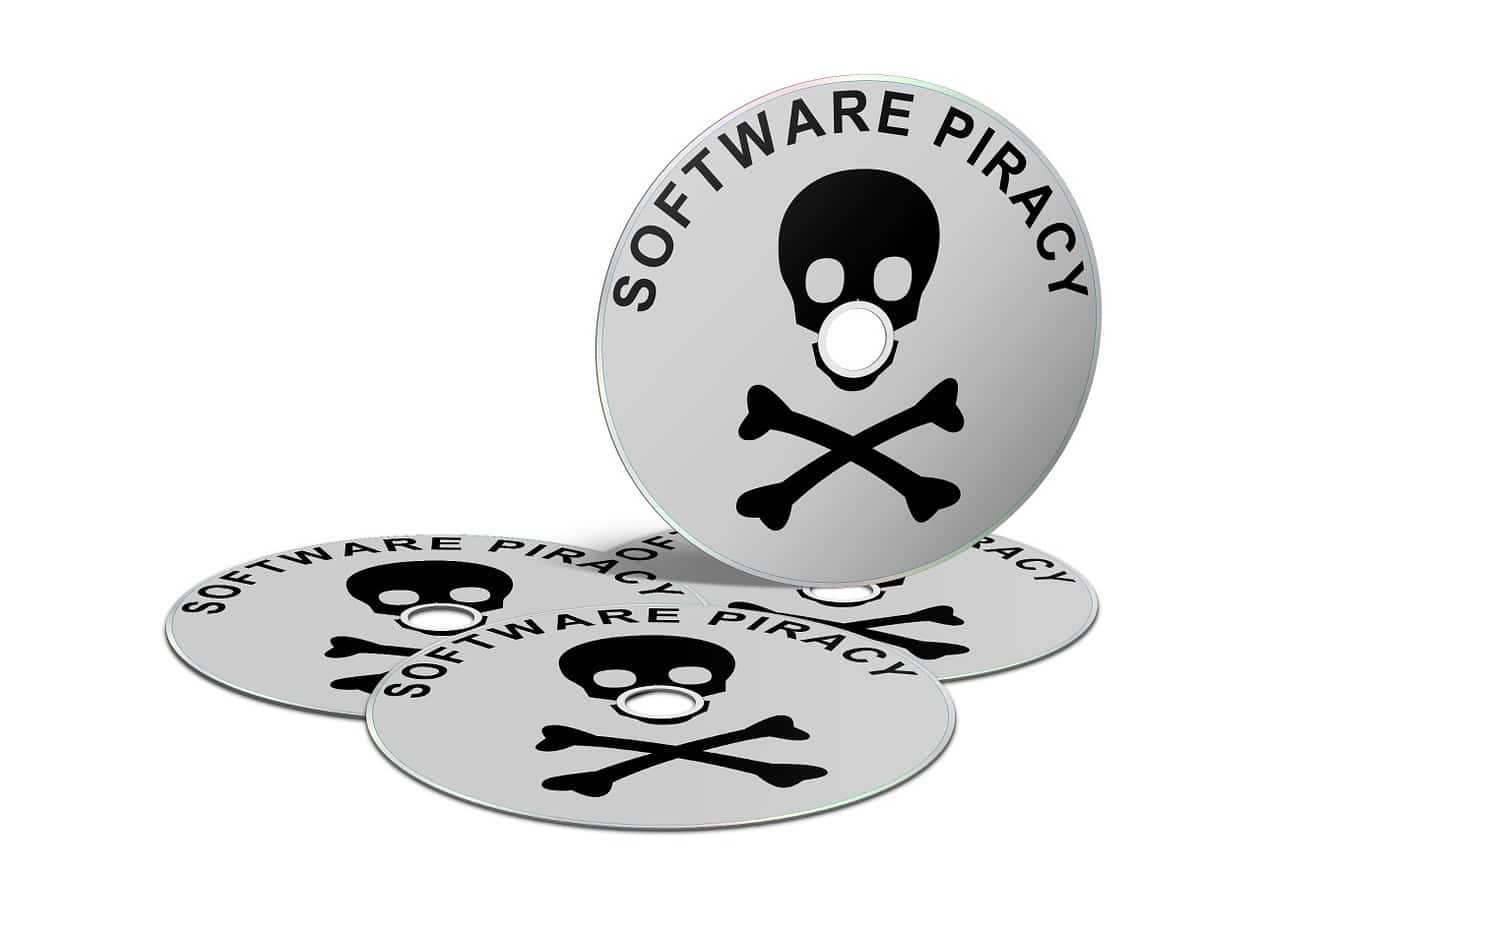 Finally, the END of Software Piracy is near !